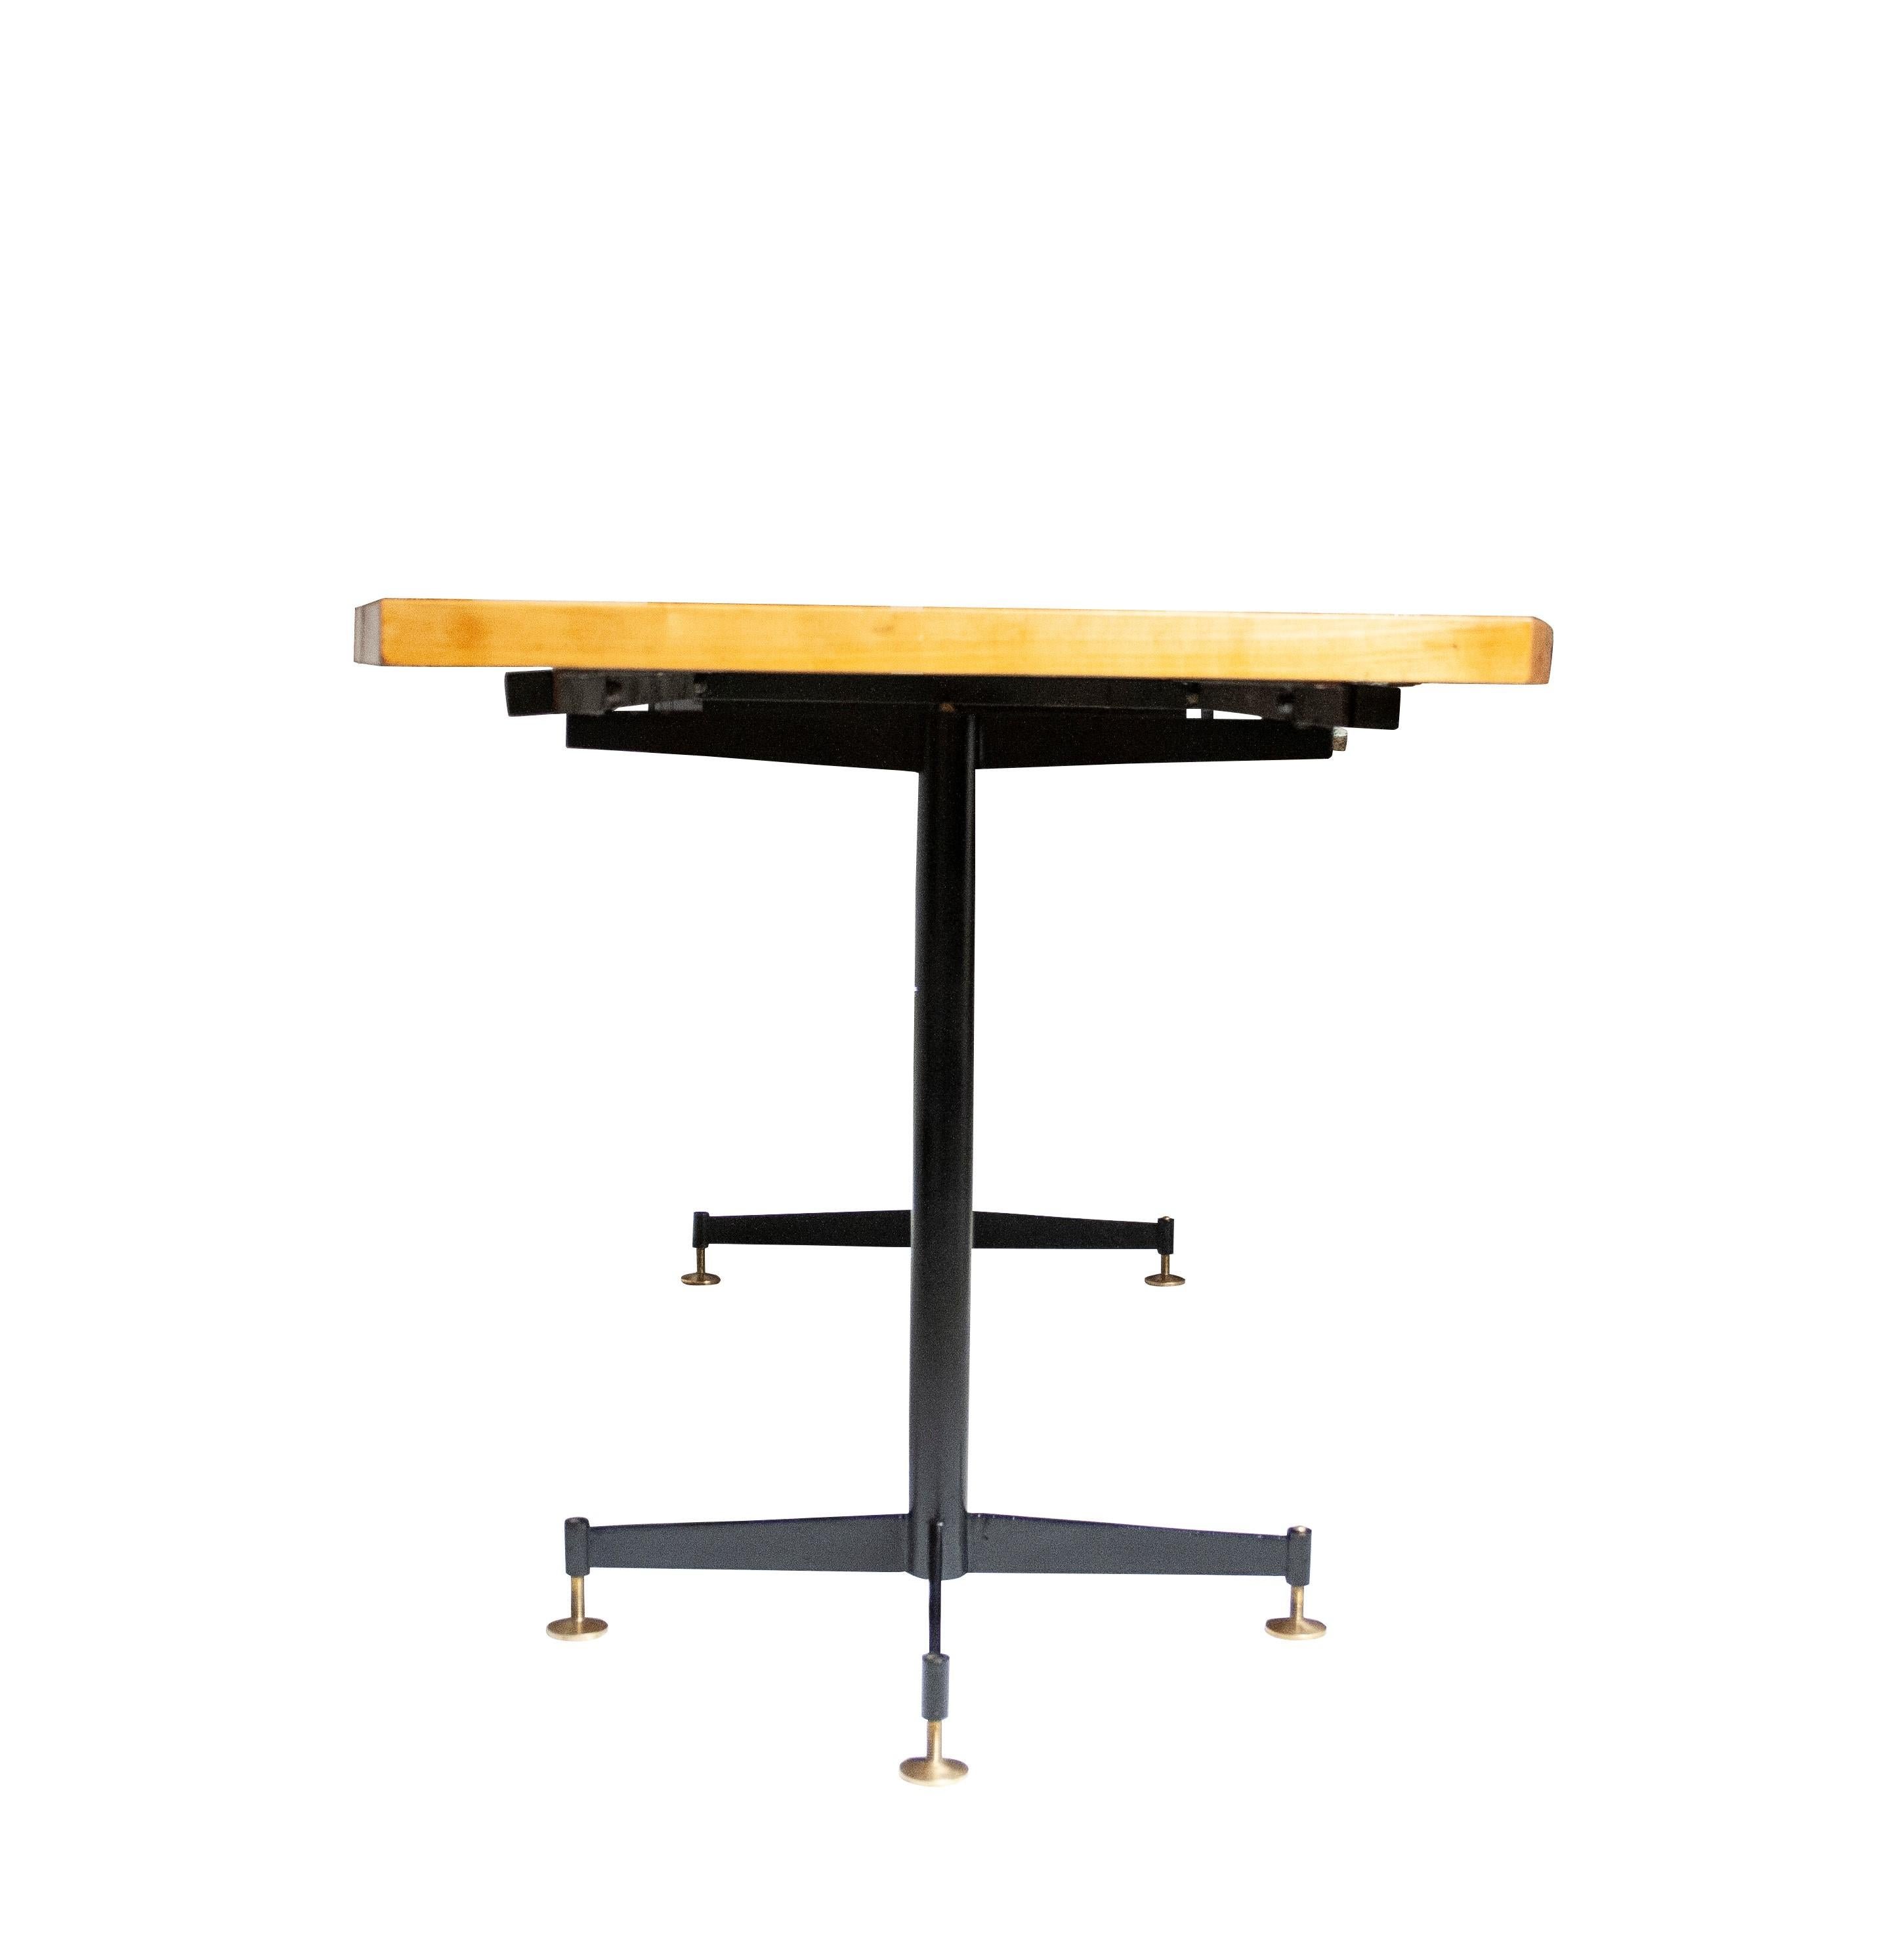 Metalwork Mid- Century Modern Extendable Table Designed by Luigi Scremin, Italy, 1950. For Sale